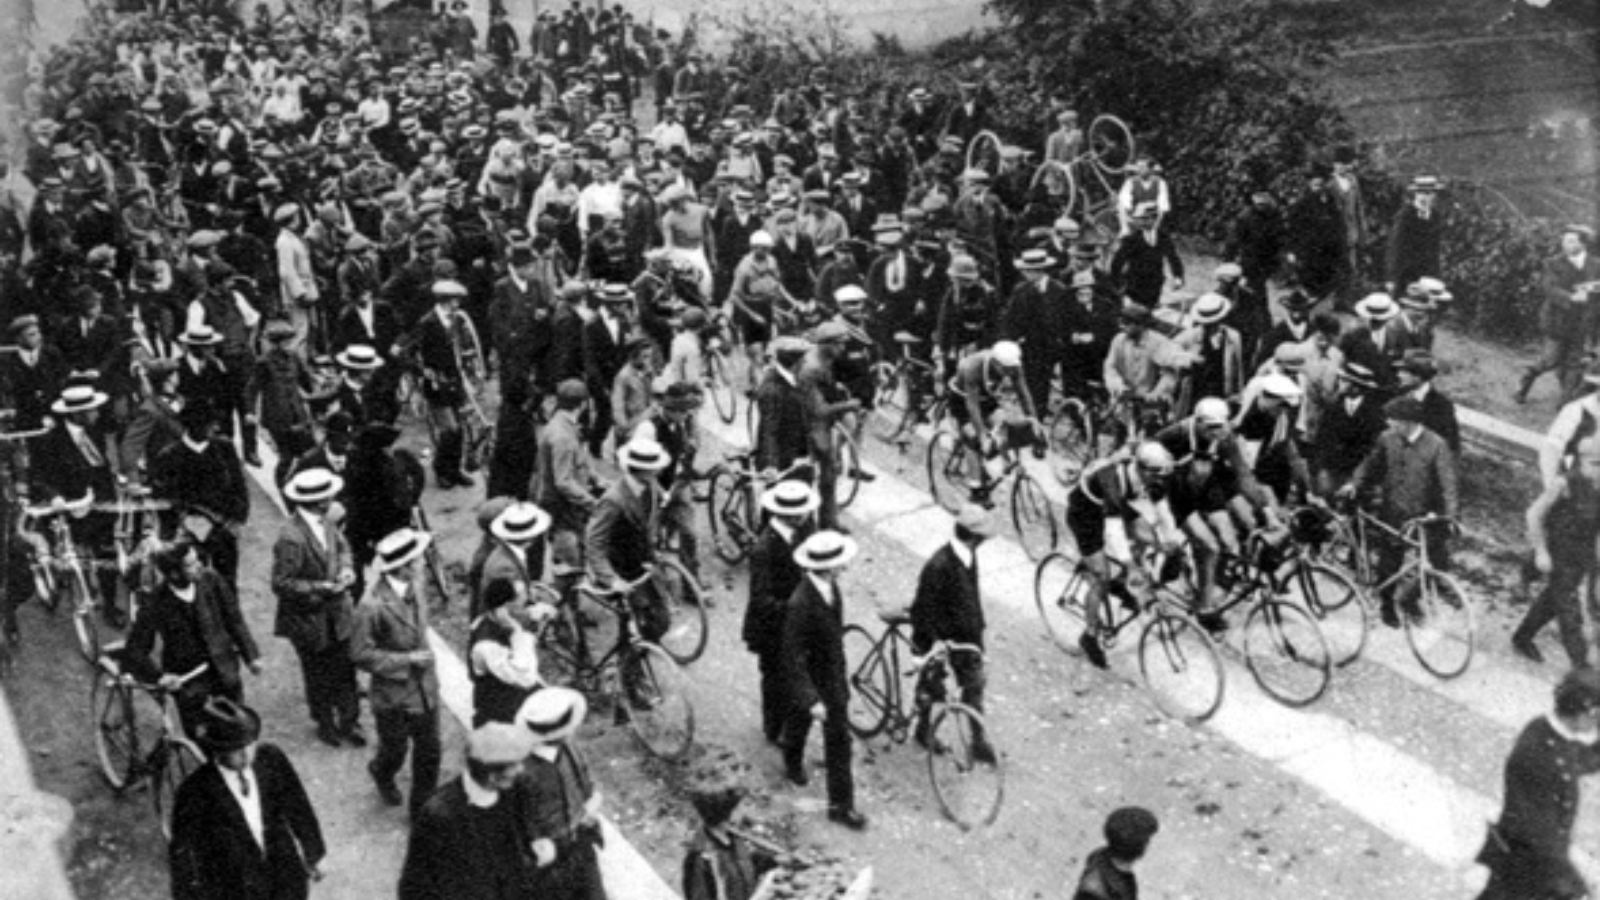 Cyclists at the start Giro d'Italia in 1912